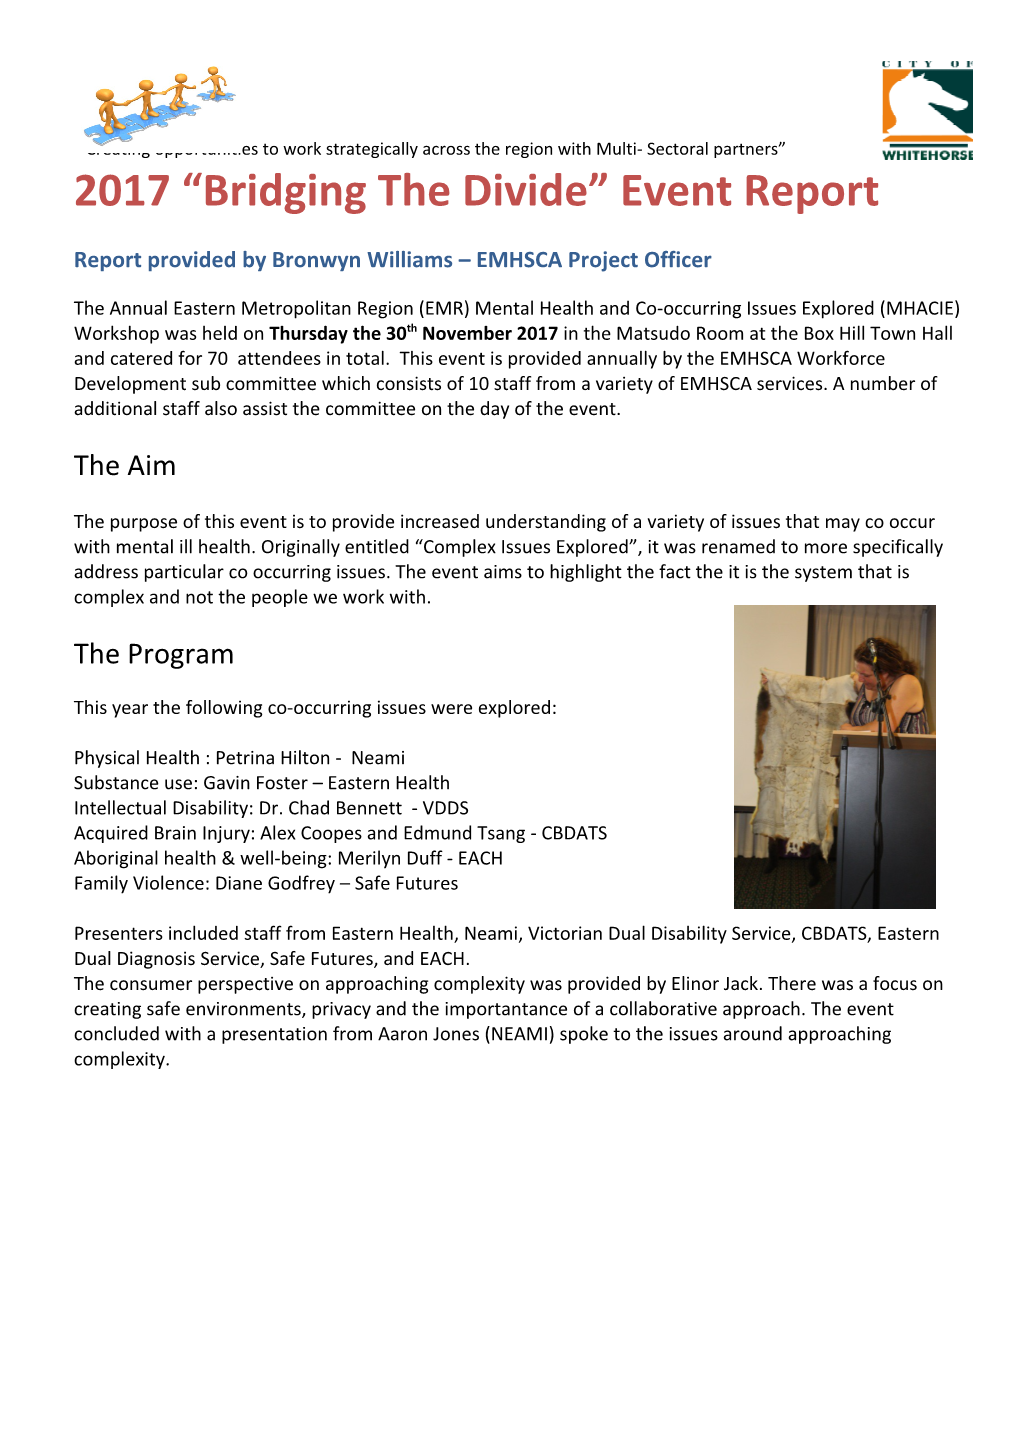 Report Provided by Bronwyn Williams EMHSCA Project Officer